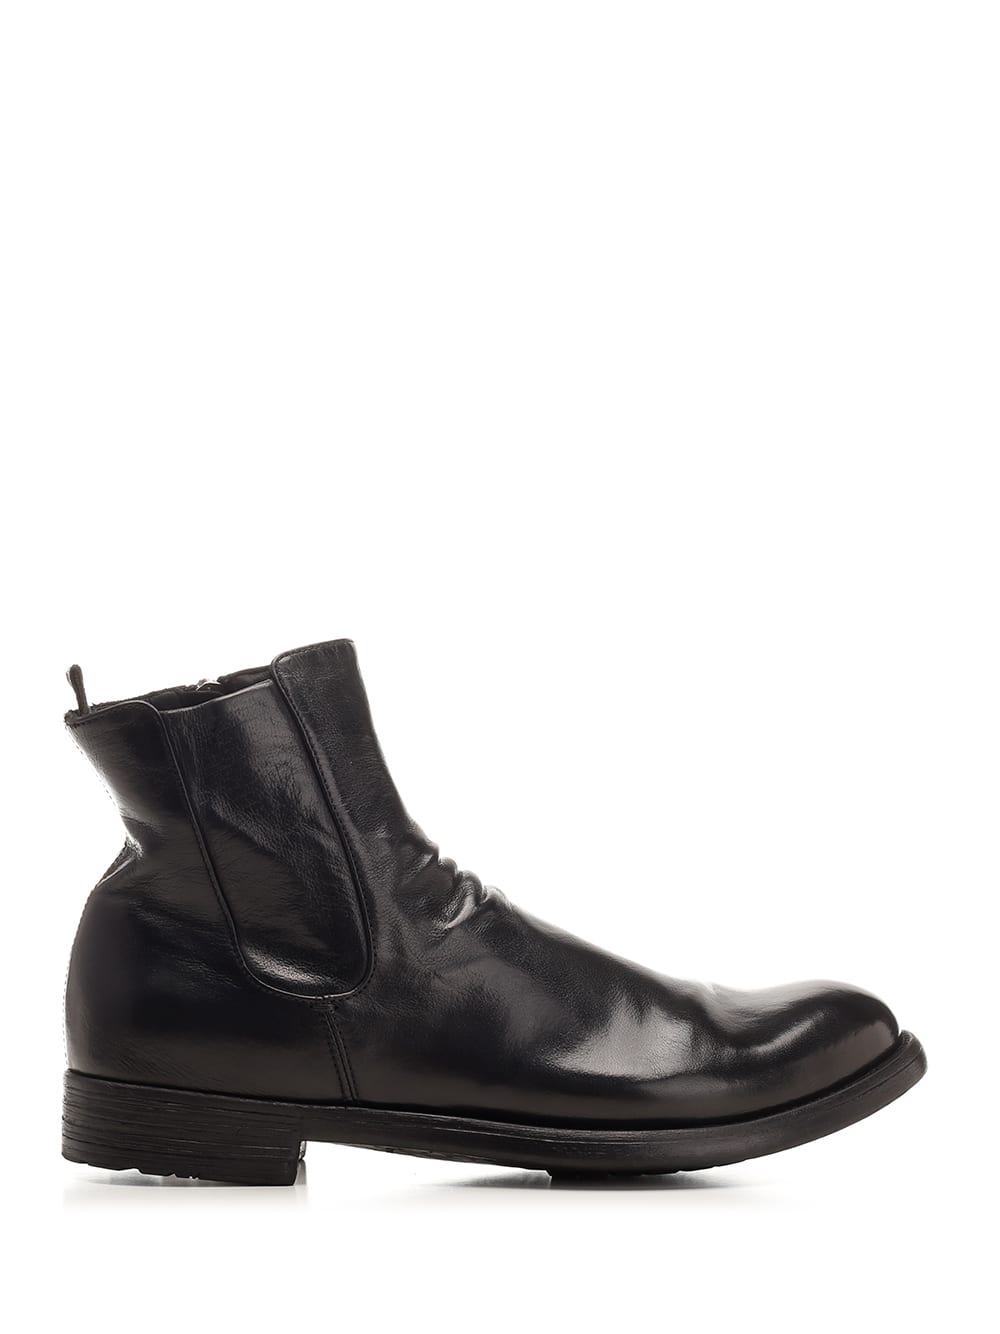 OFFICINE CREATIVE BLACK ANKLE BOOT